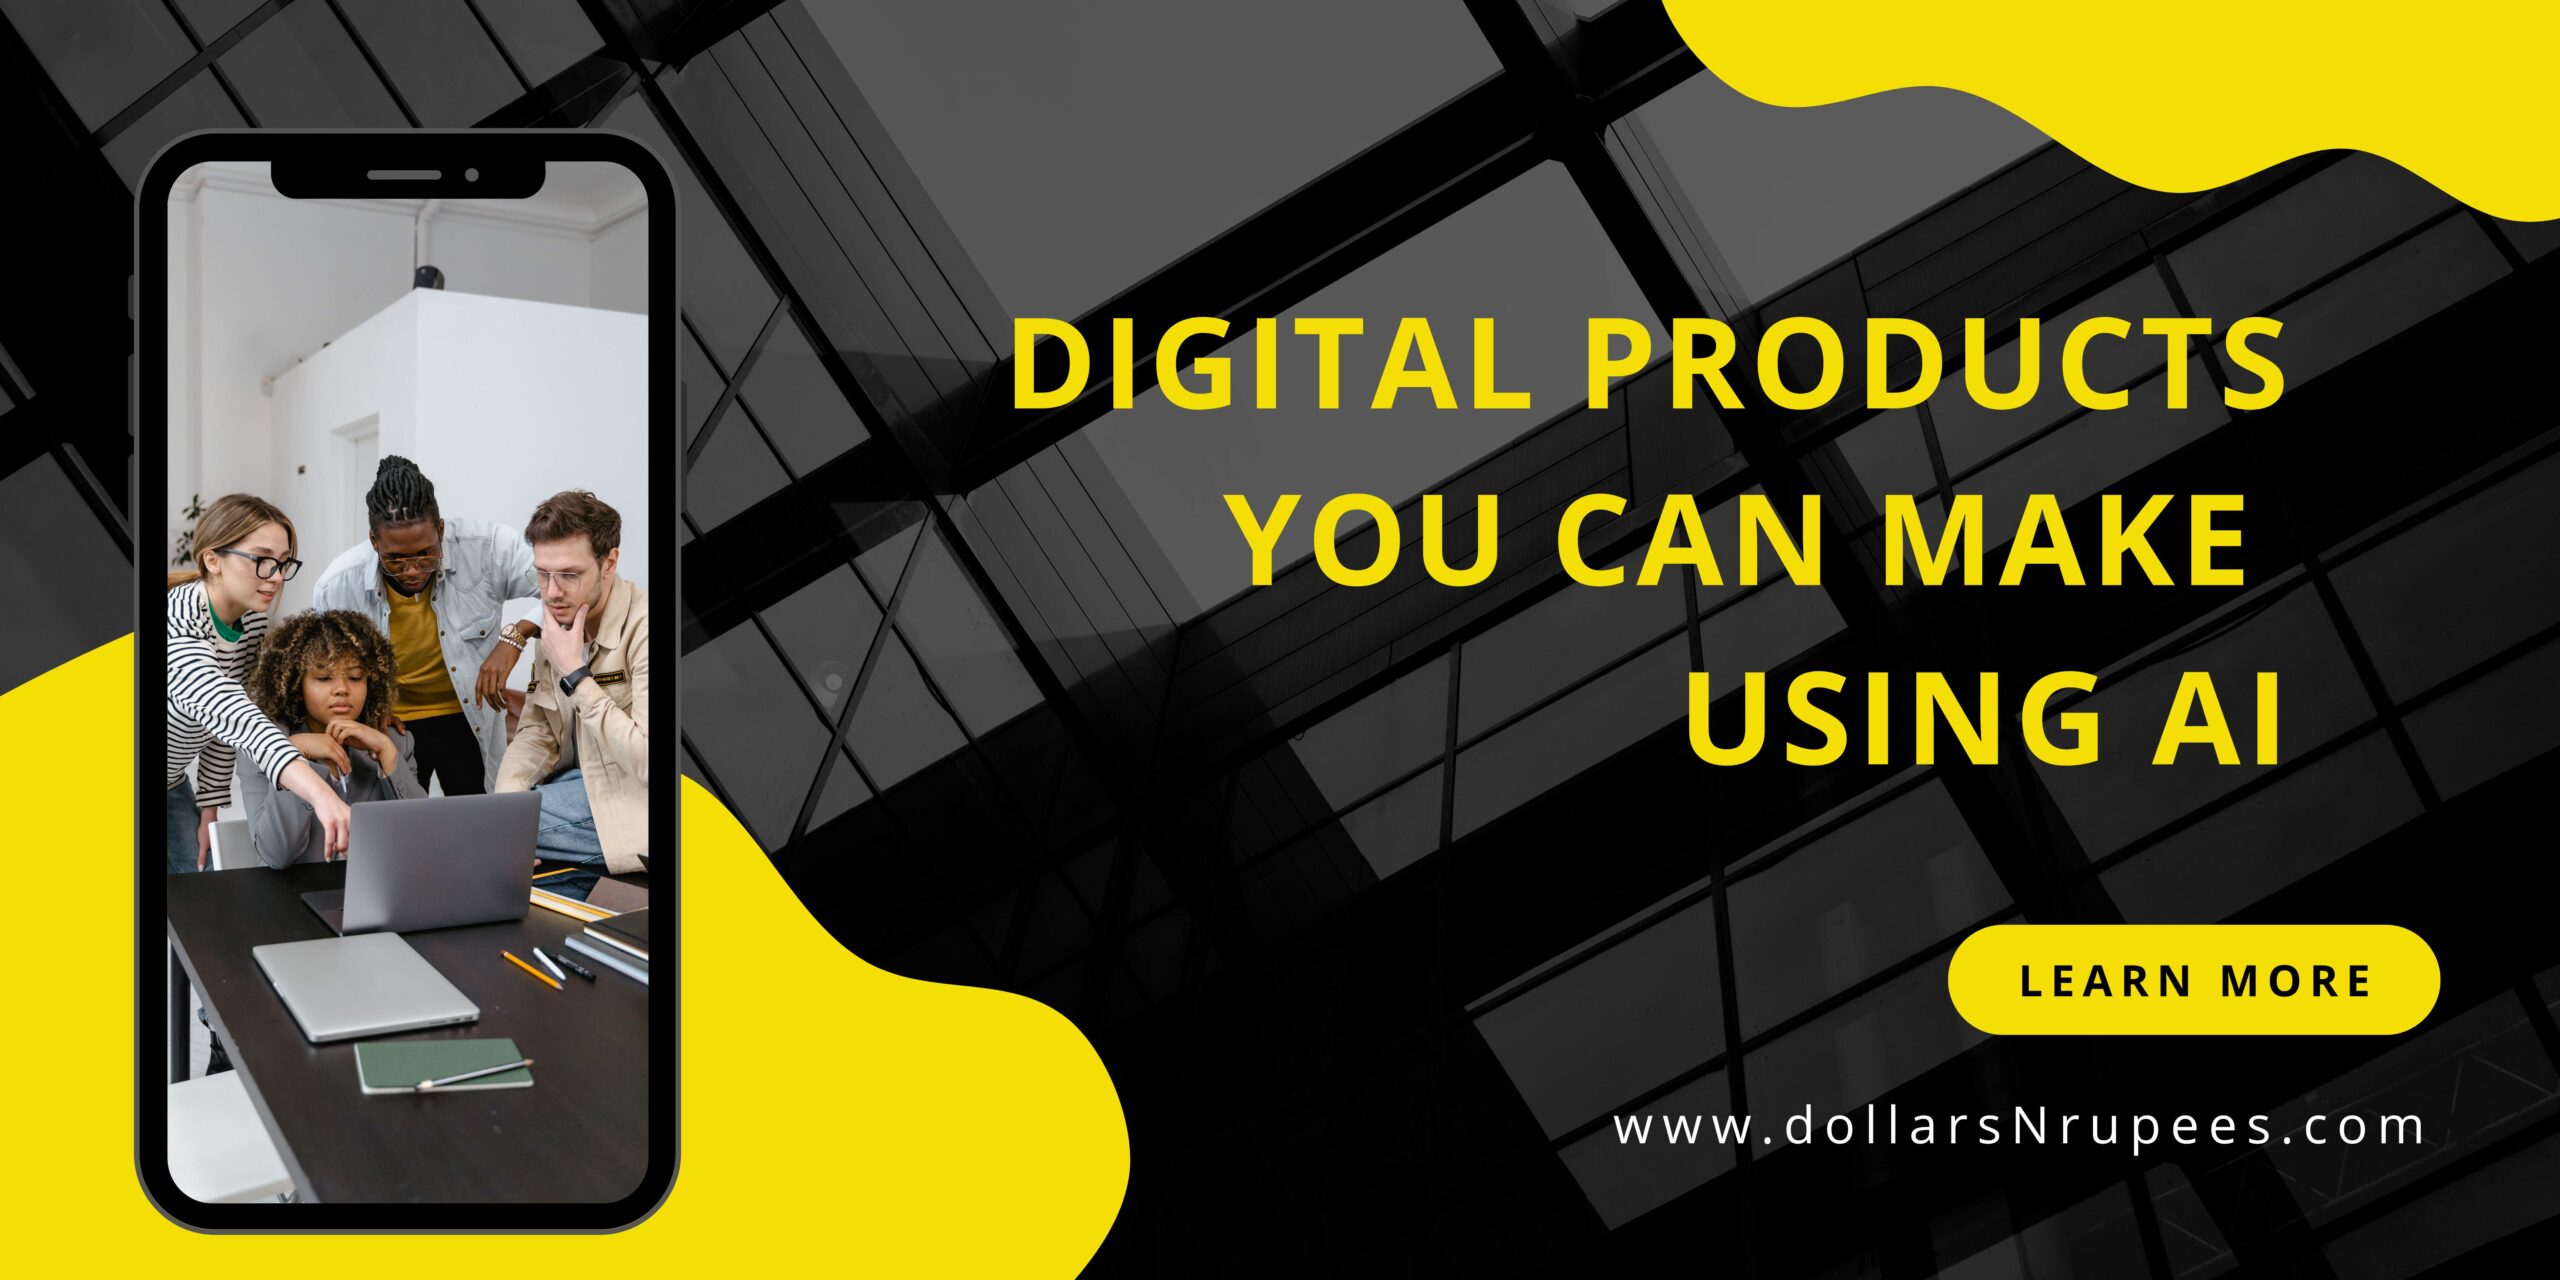 Digital Products you can make using AI